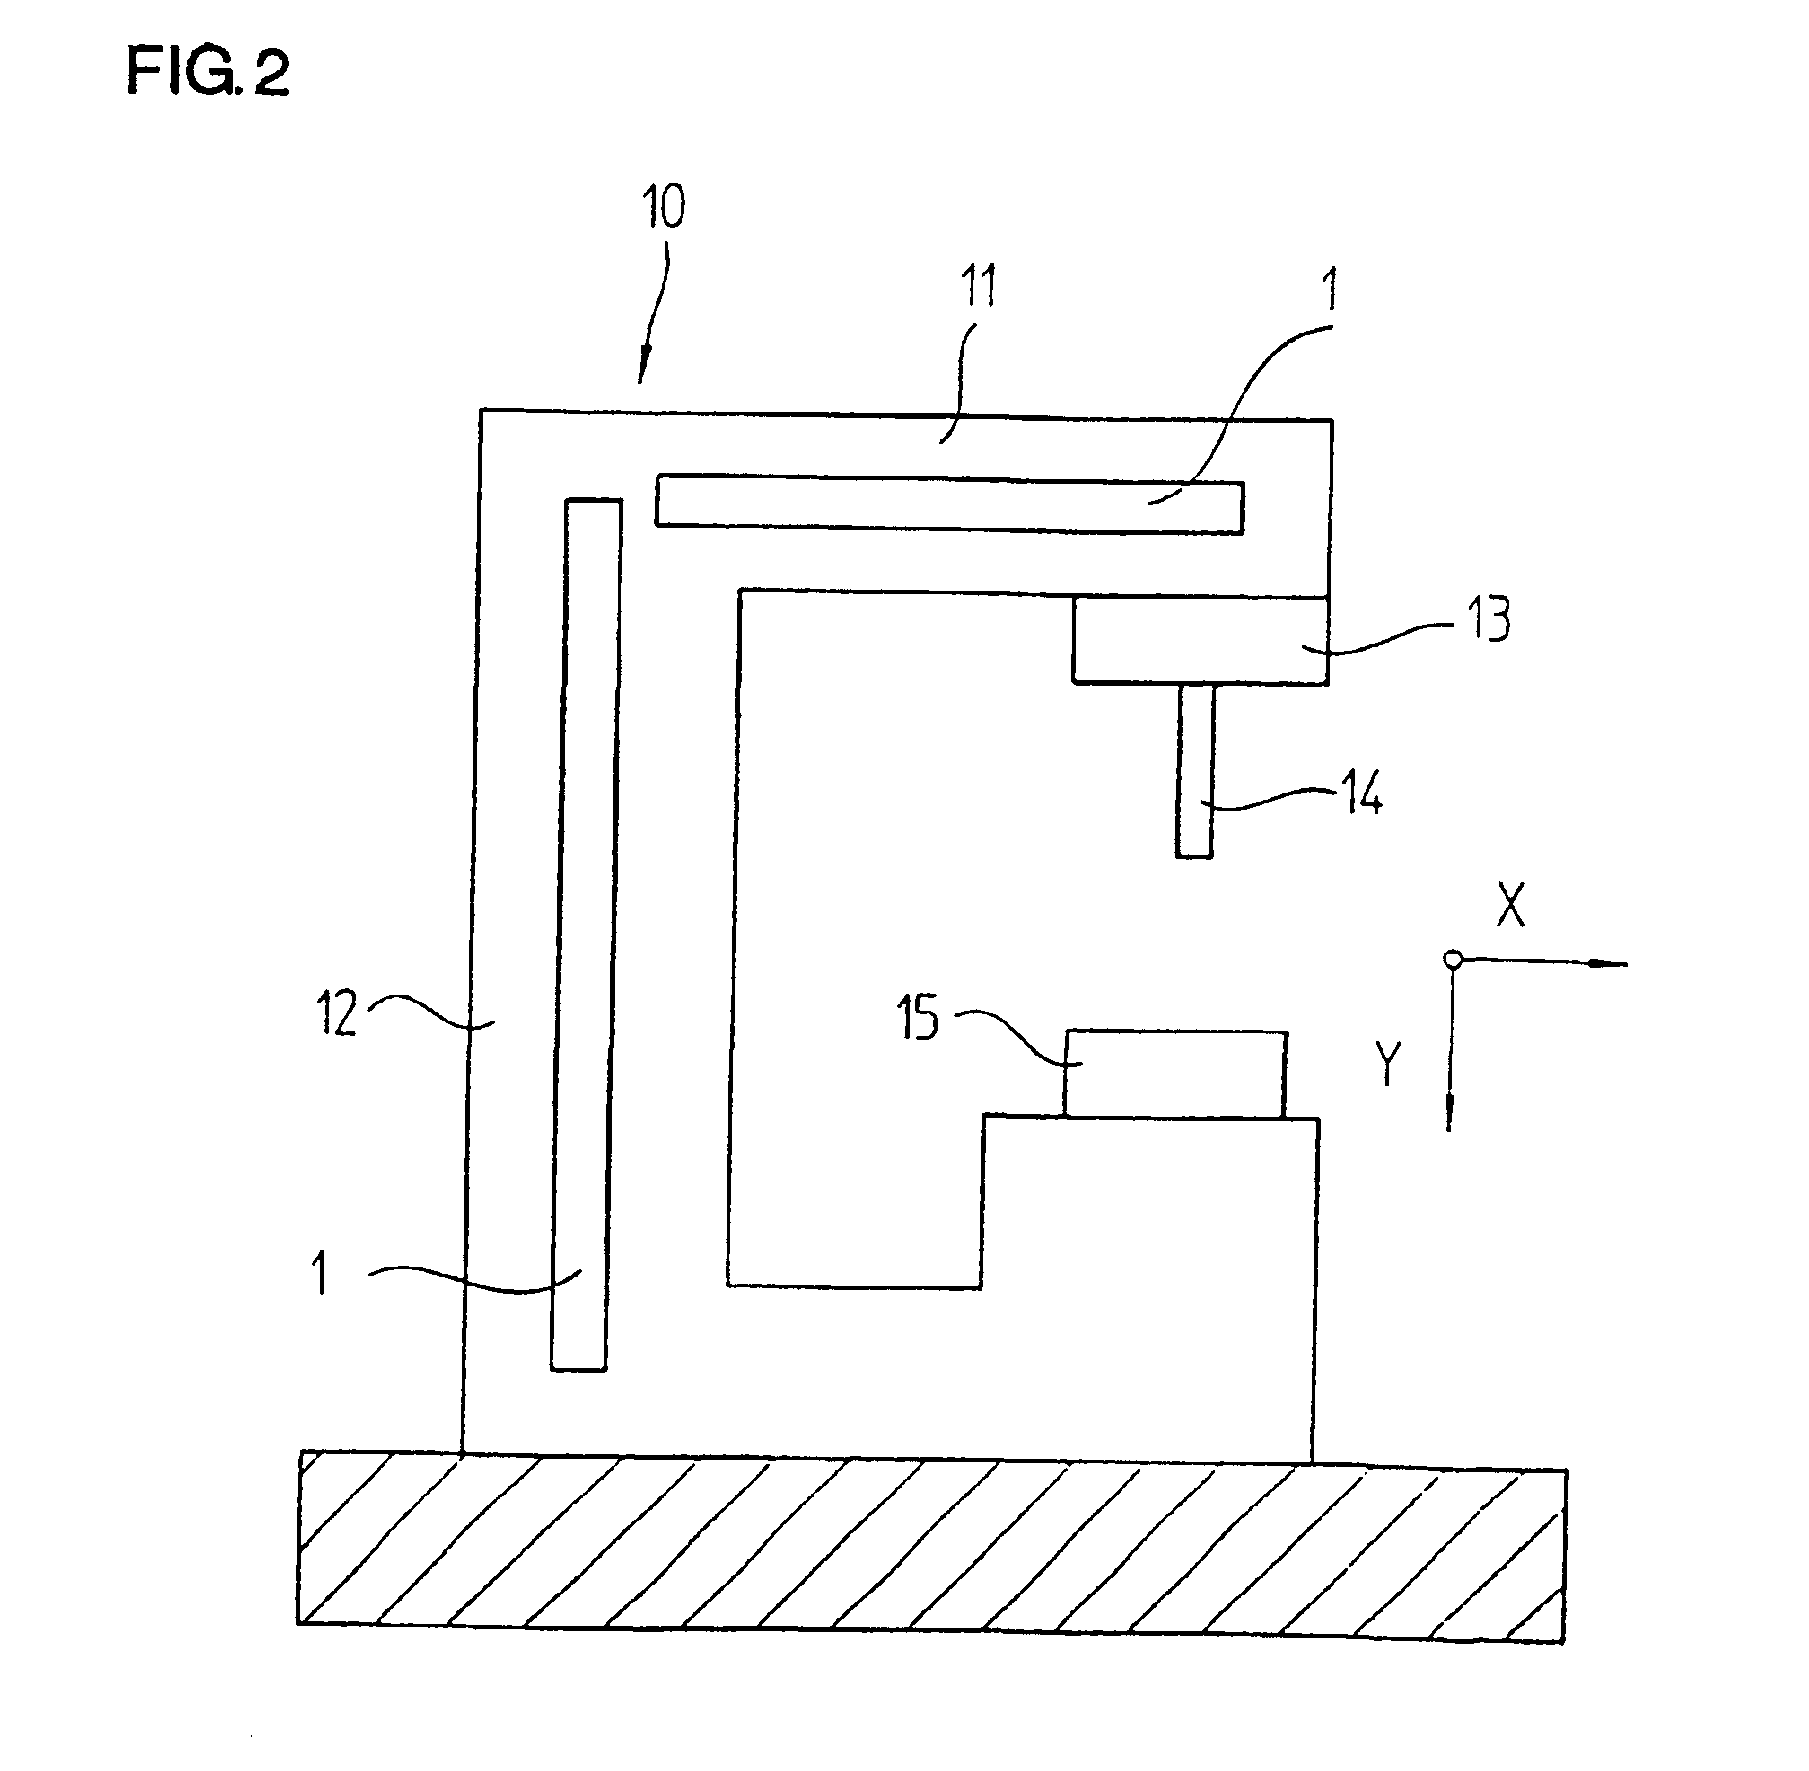 Device for detecting a thermal linear dilation on part of a machine